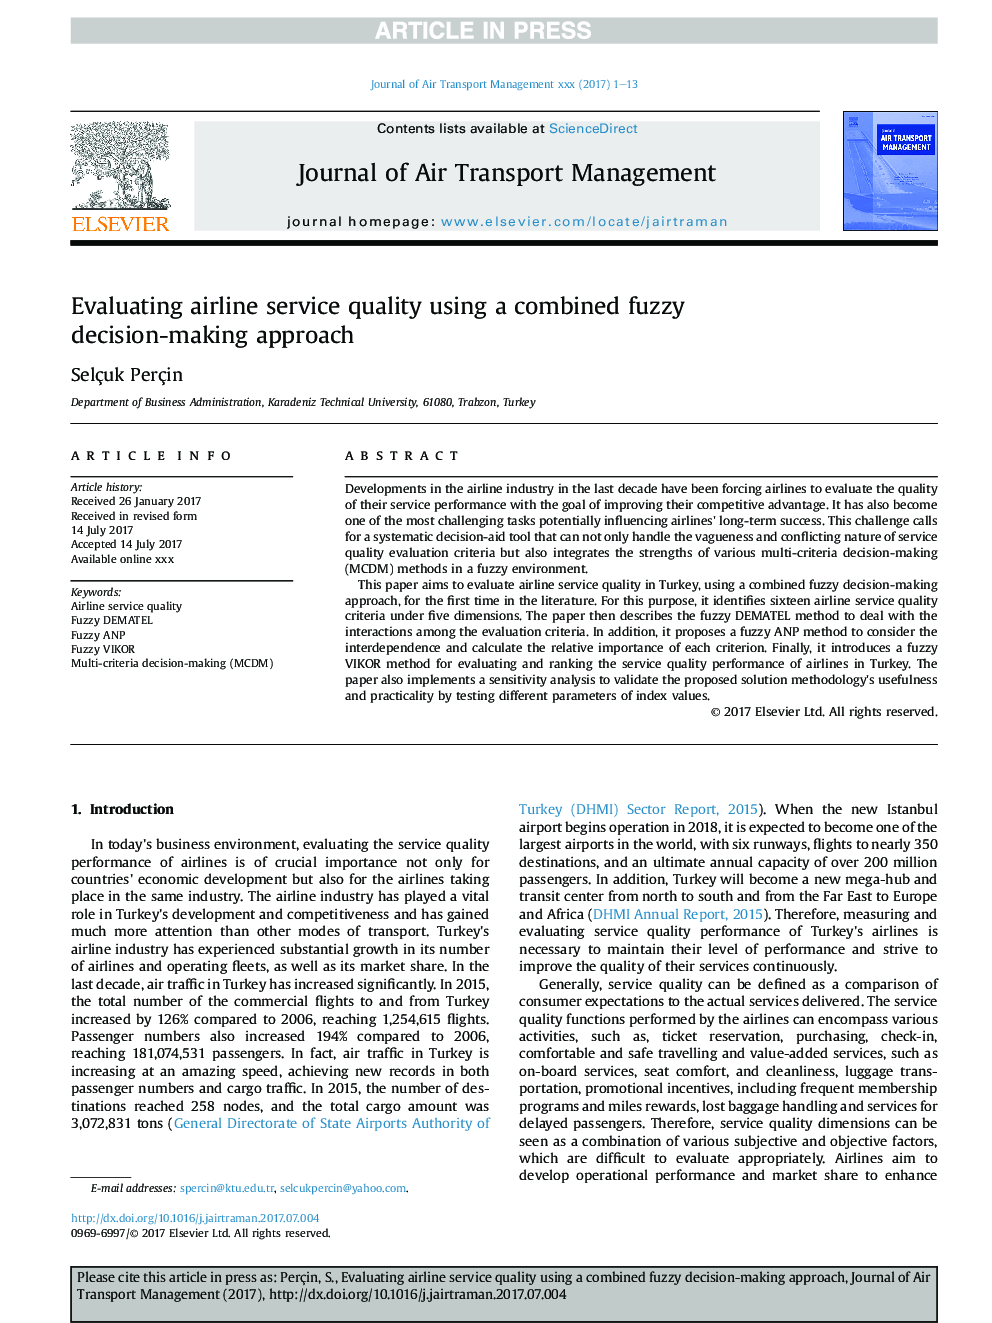 Evaluating airline service quality using a combined fuzzy decision-making approach